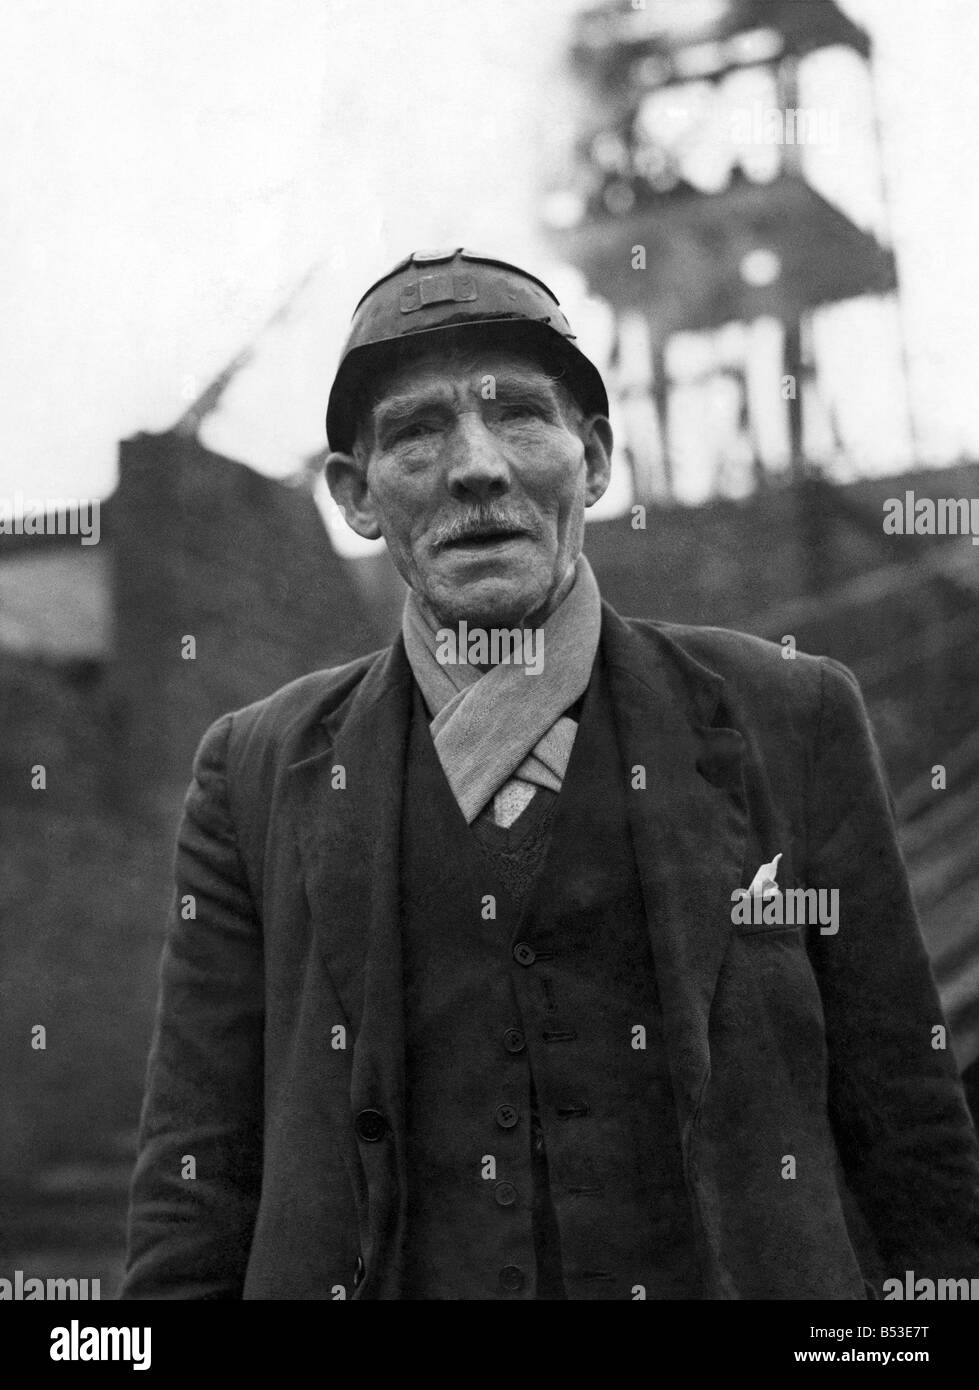 Eighty years old Mr. Joseph Brogan who has been awarded the BEM for his service as a miner. He is employed at the Garswood Hall Stock Photo